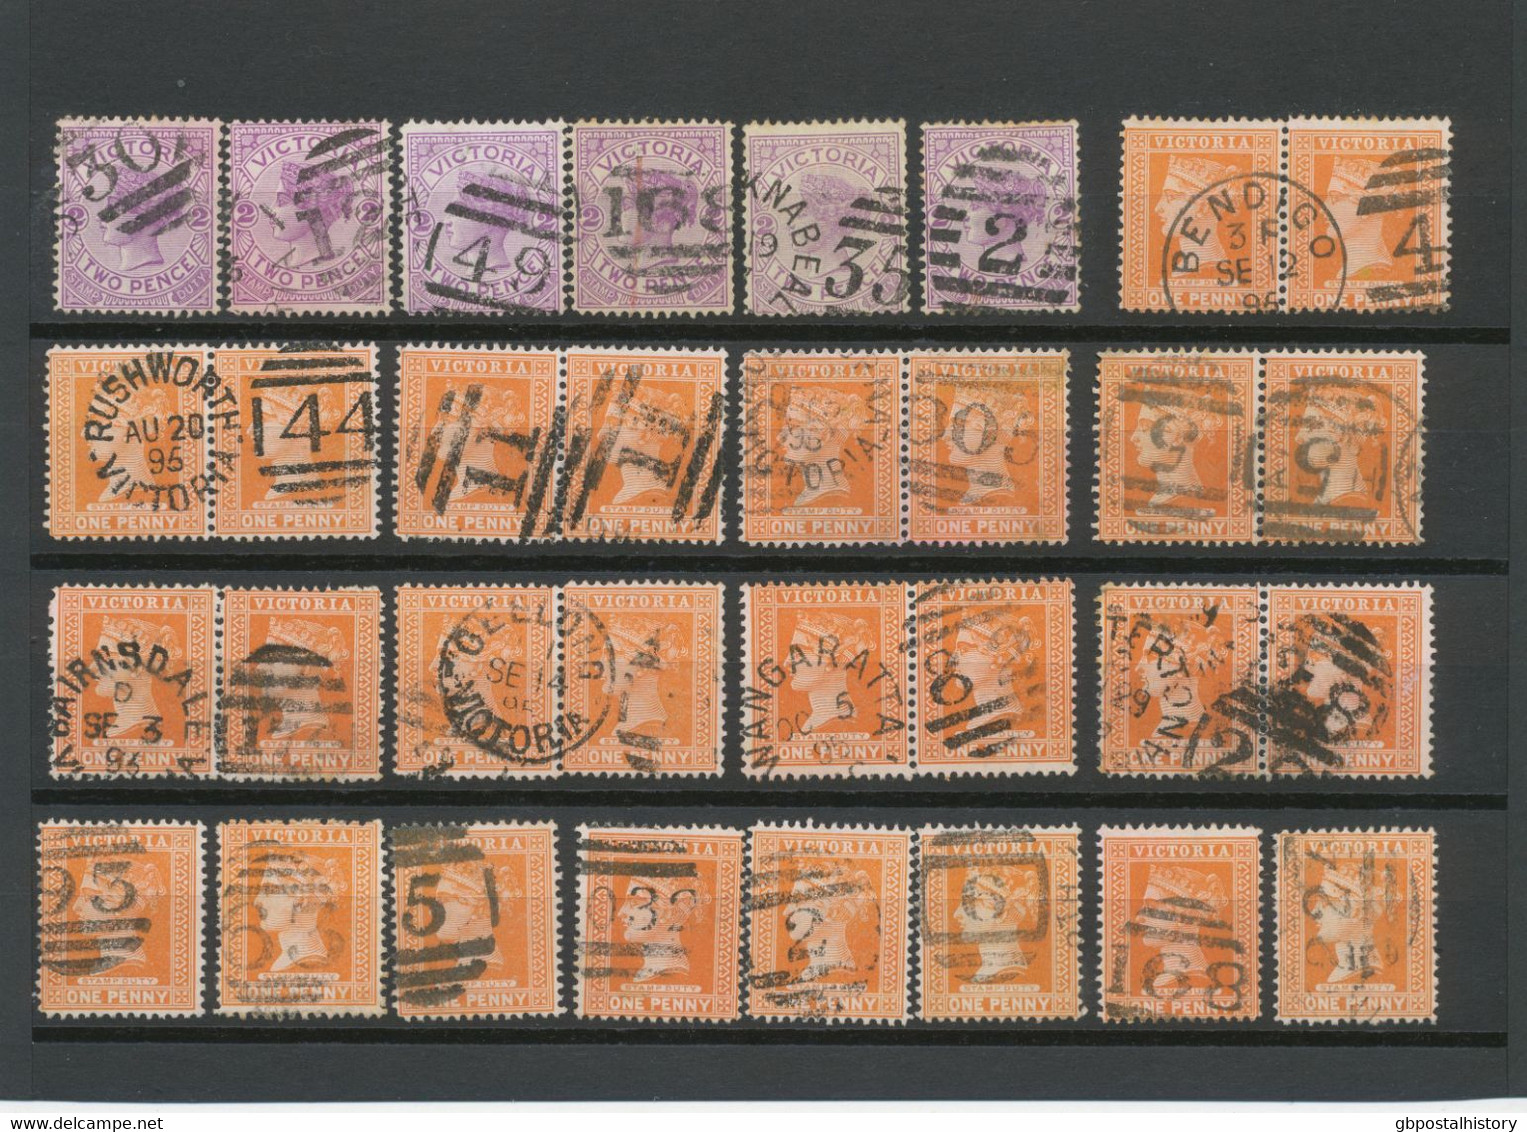 COLLECTION AUSTRALIA OF CLASSIC POSTMARKS (NUMERALS, DUPLEX, TPO (Railway), R (Registered) And Some Others) Ca. 1880/190 - Sammlungen